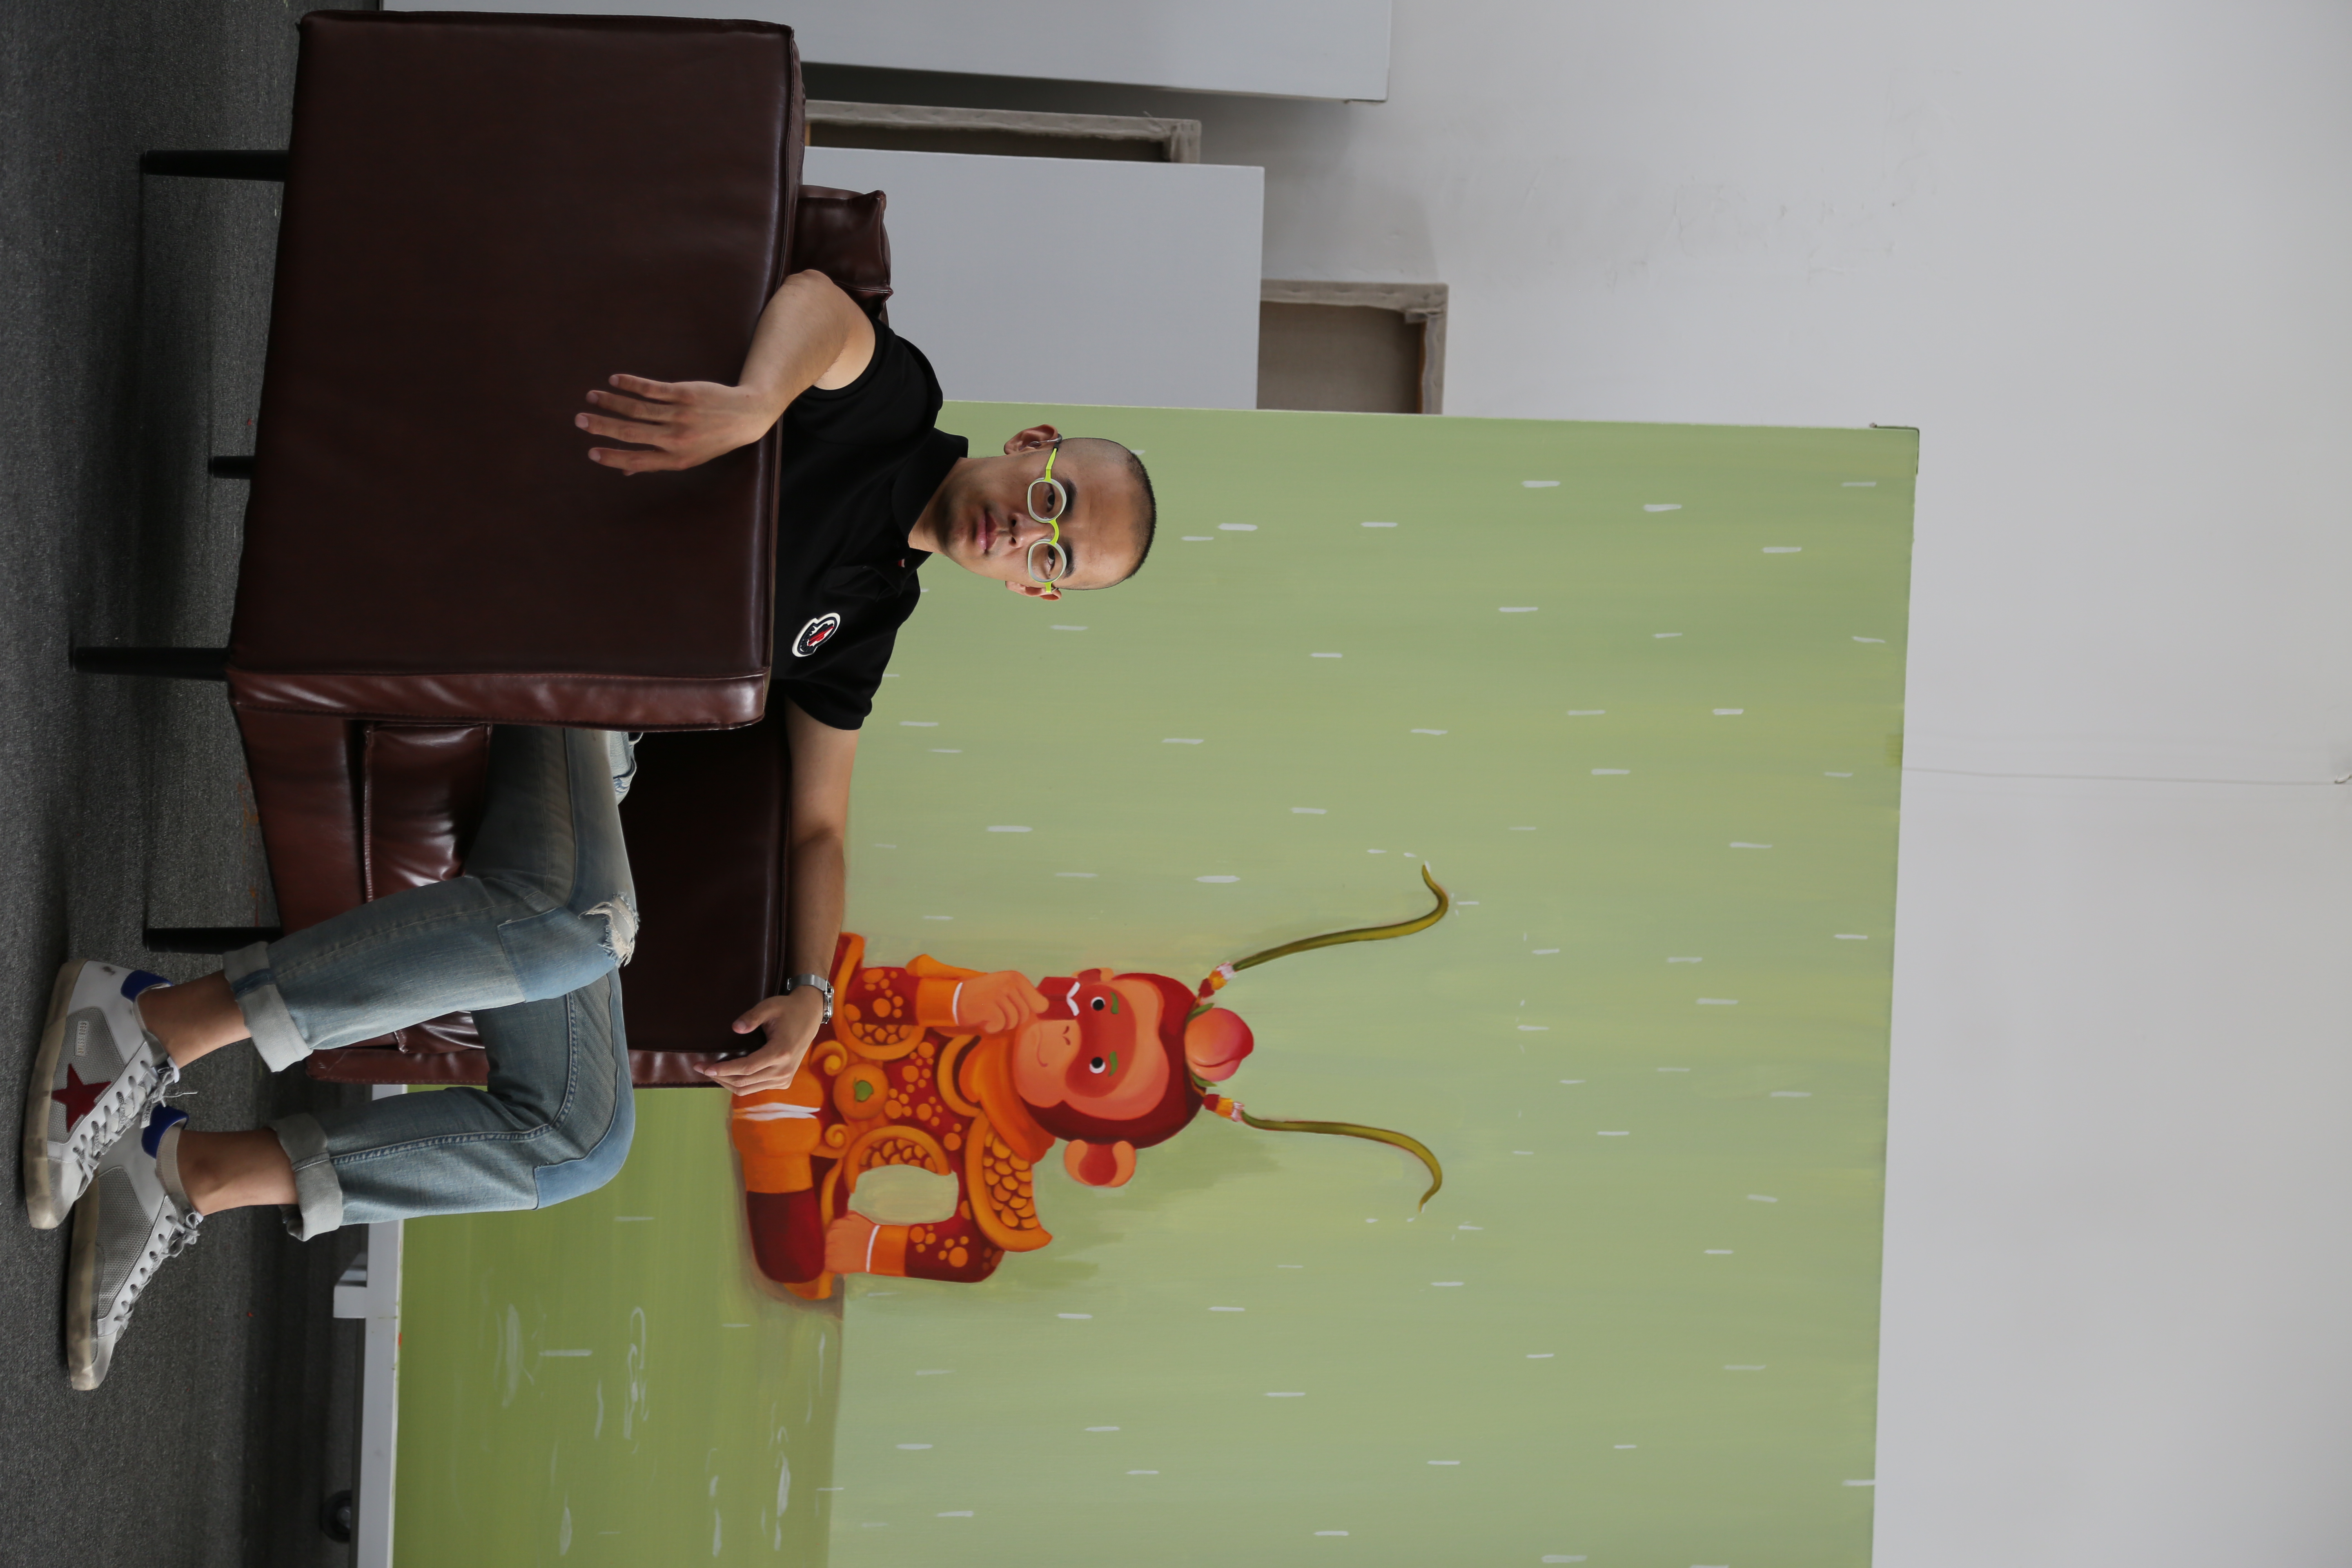 Chen Jianzhou and his painting 